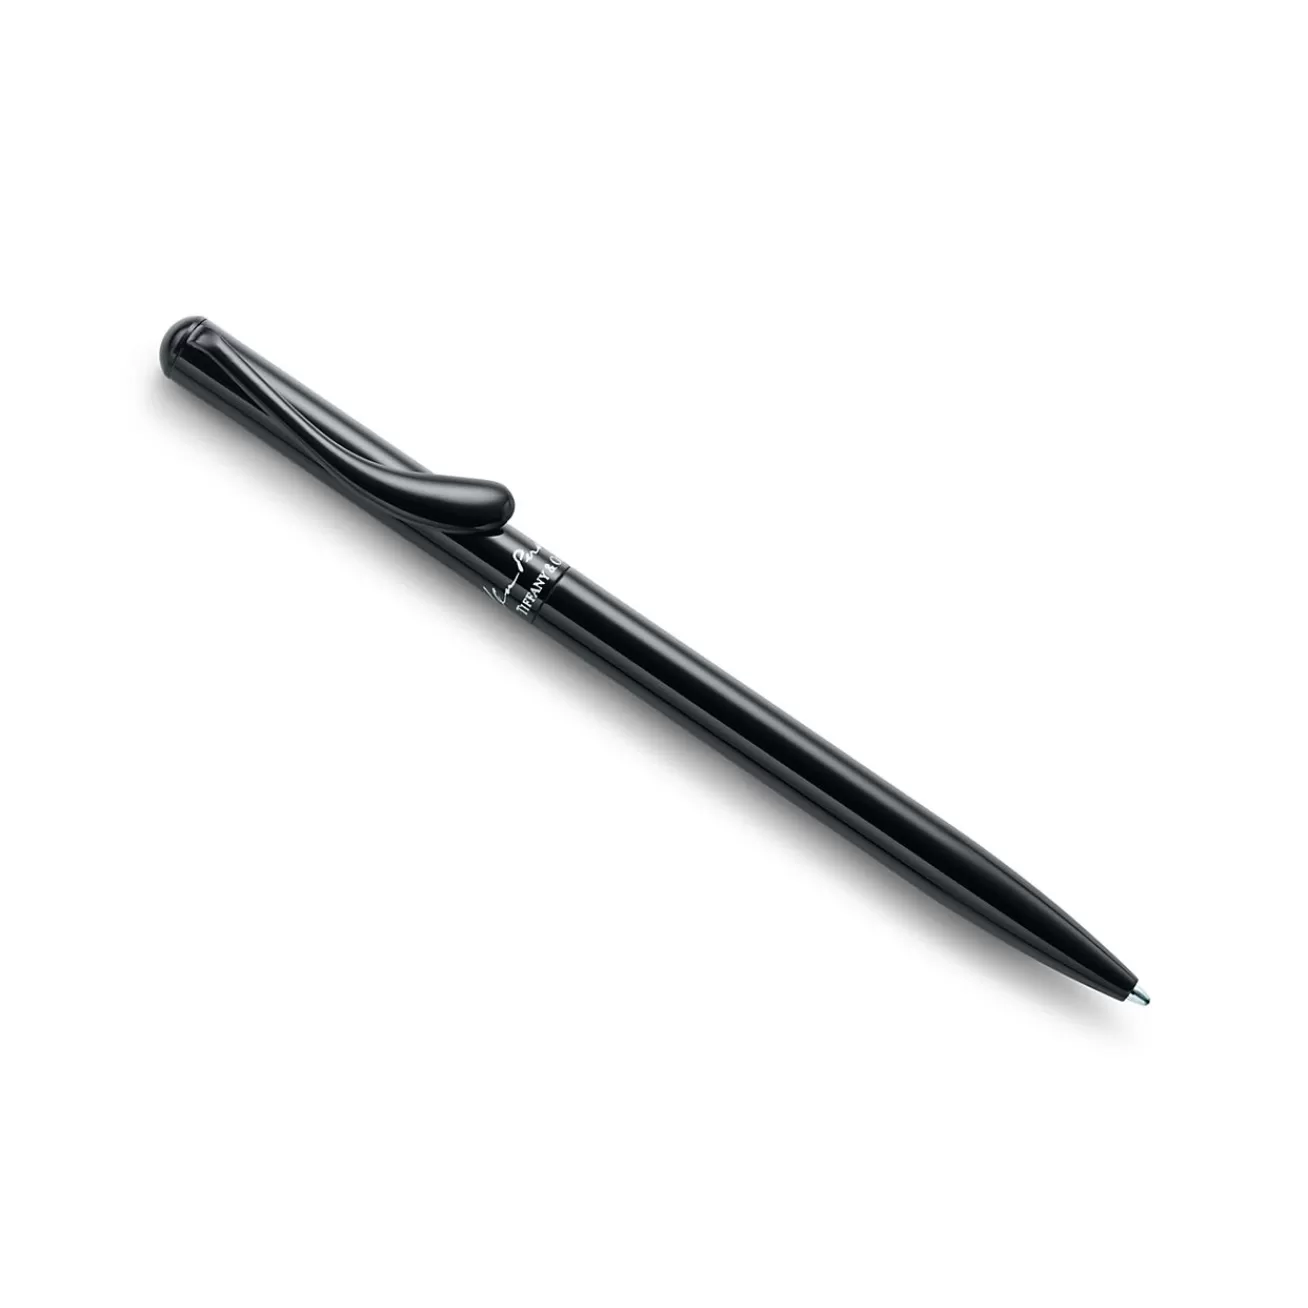 Tiffany & Co. Elsa Peretti® retractable ballpoint pen in black lacquer finish over brass. | ^ Stationery, Games & Unique Objects | Games & Novelties